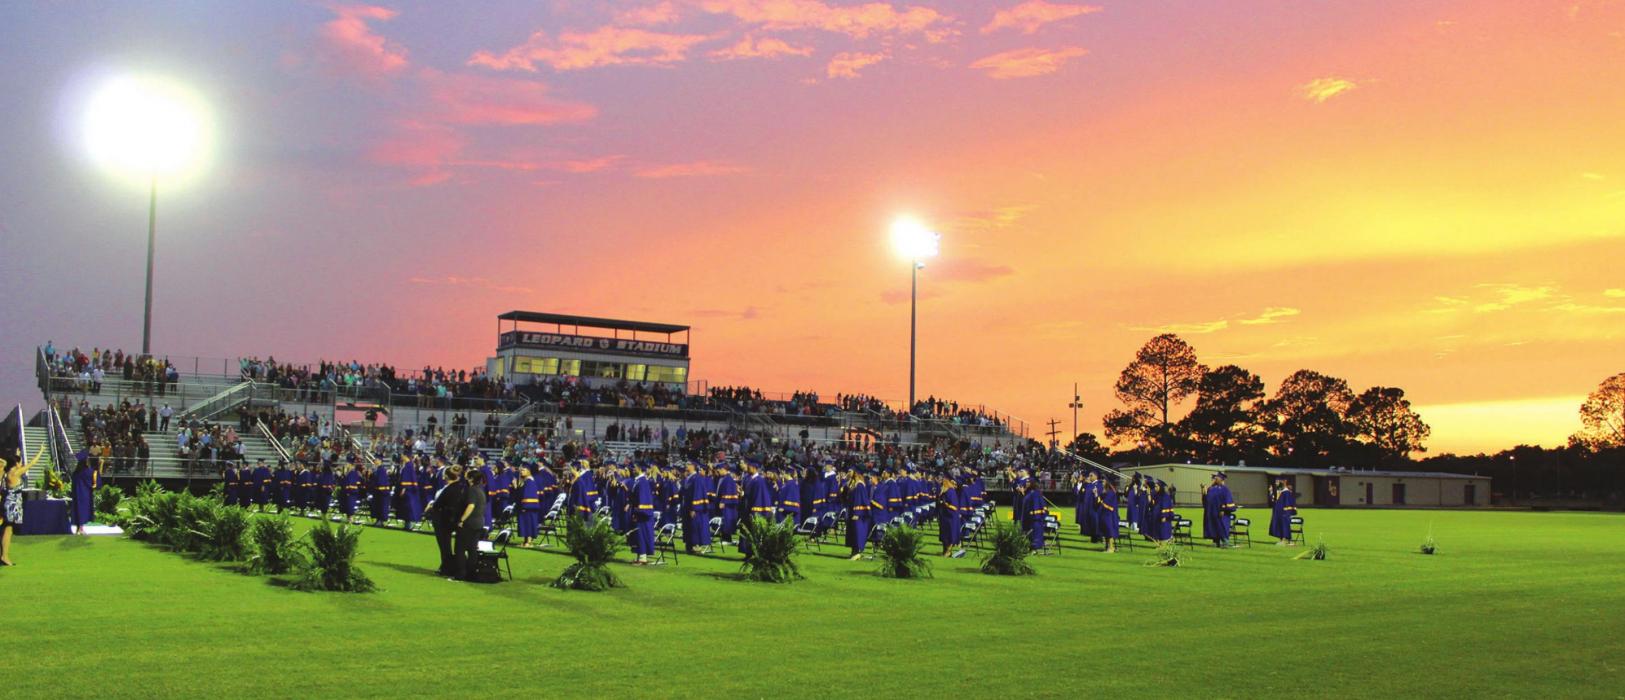 An evening of powerful storms in the area gave way to a beautiful purple and gold sunset for the graduation ceremony for the La Grange Class of 2020 Thursday. Photo by Jeff Wick